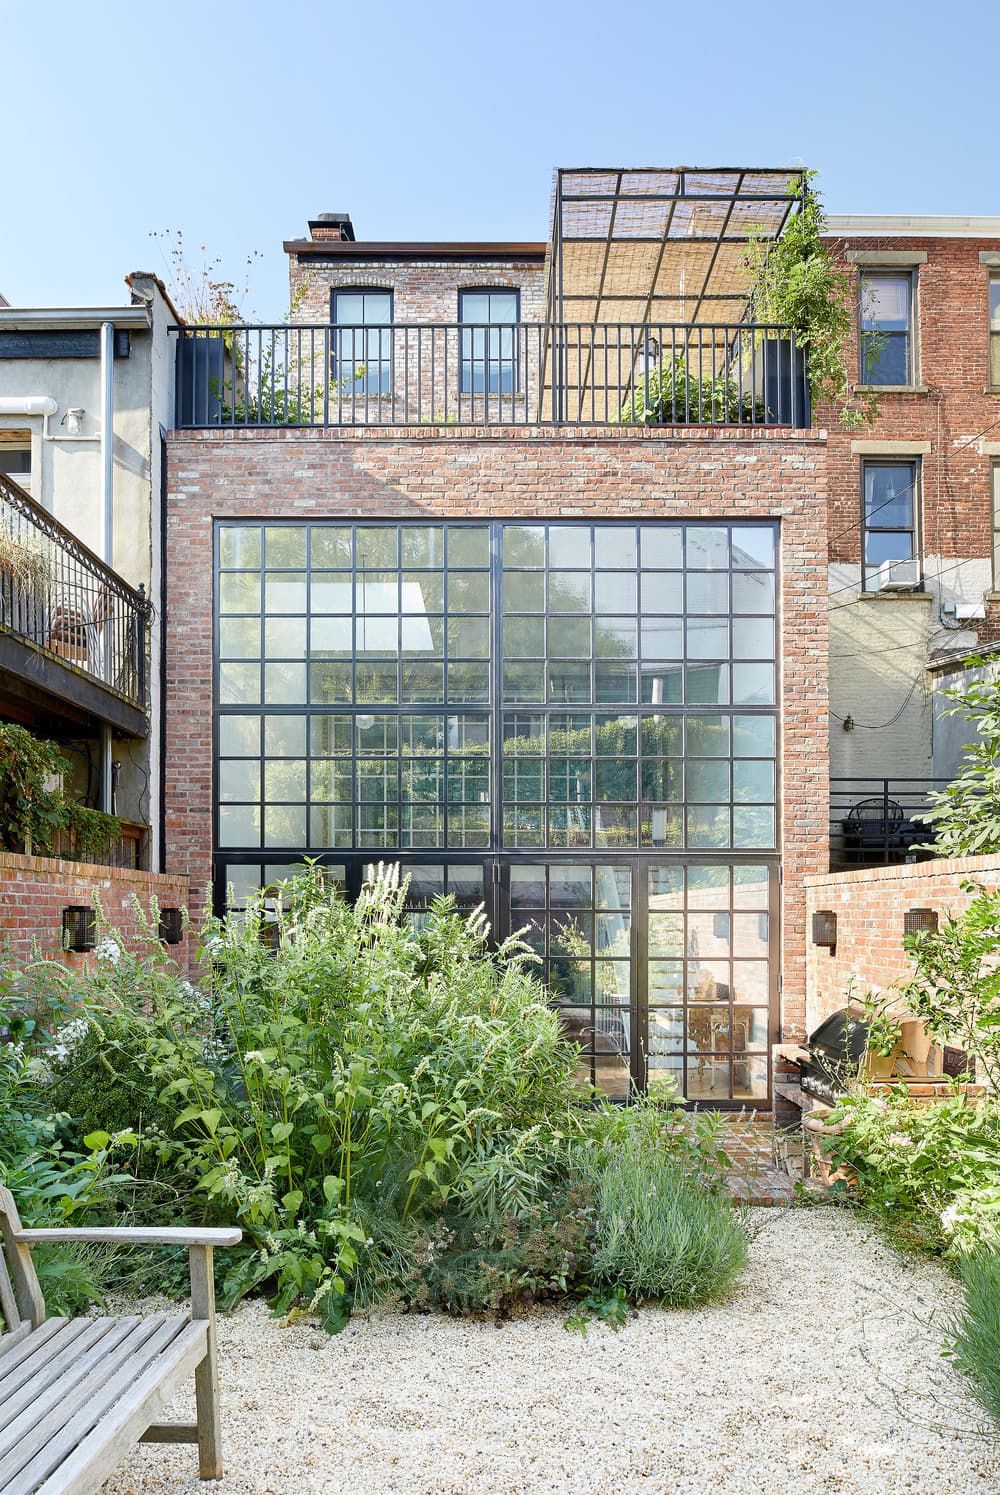 Cube | House in Historic Brownstone Brooklyn, New York